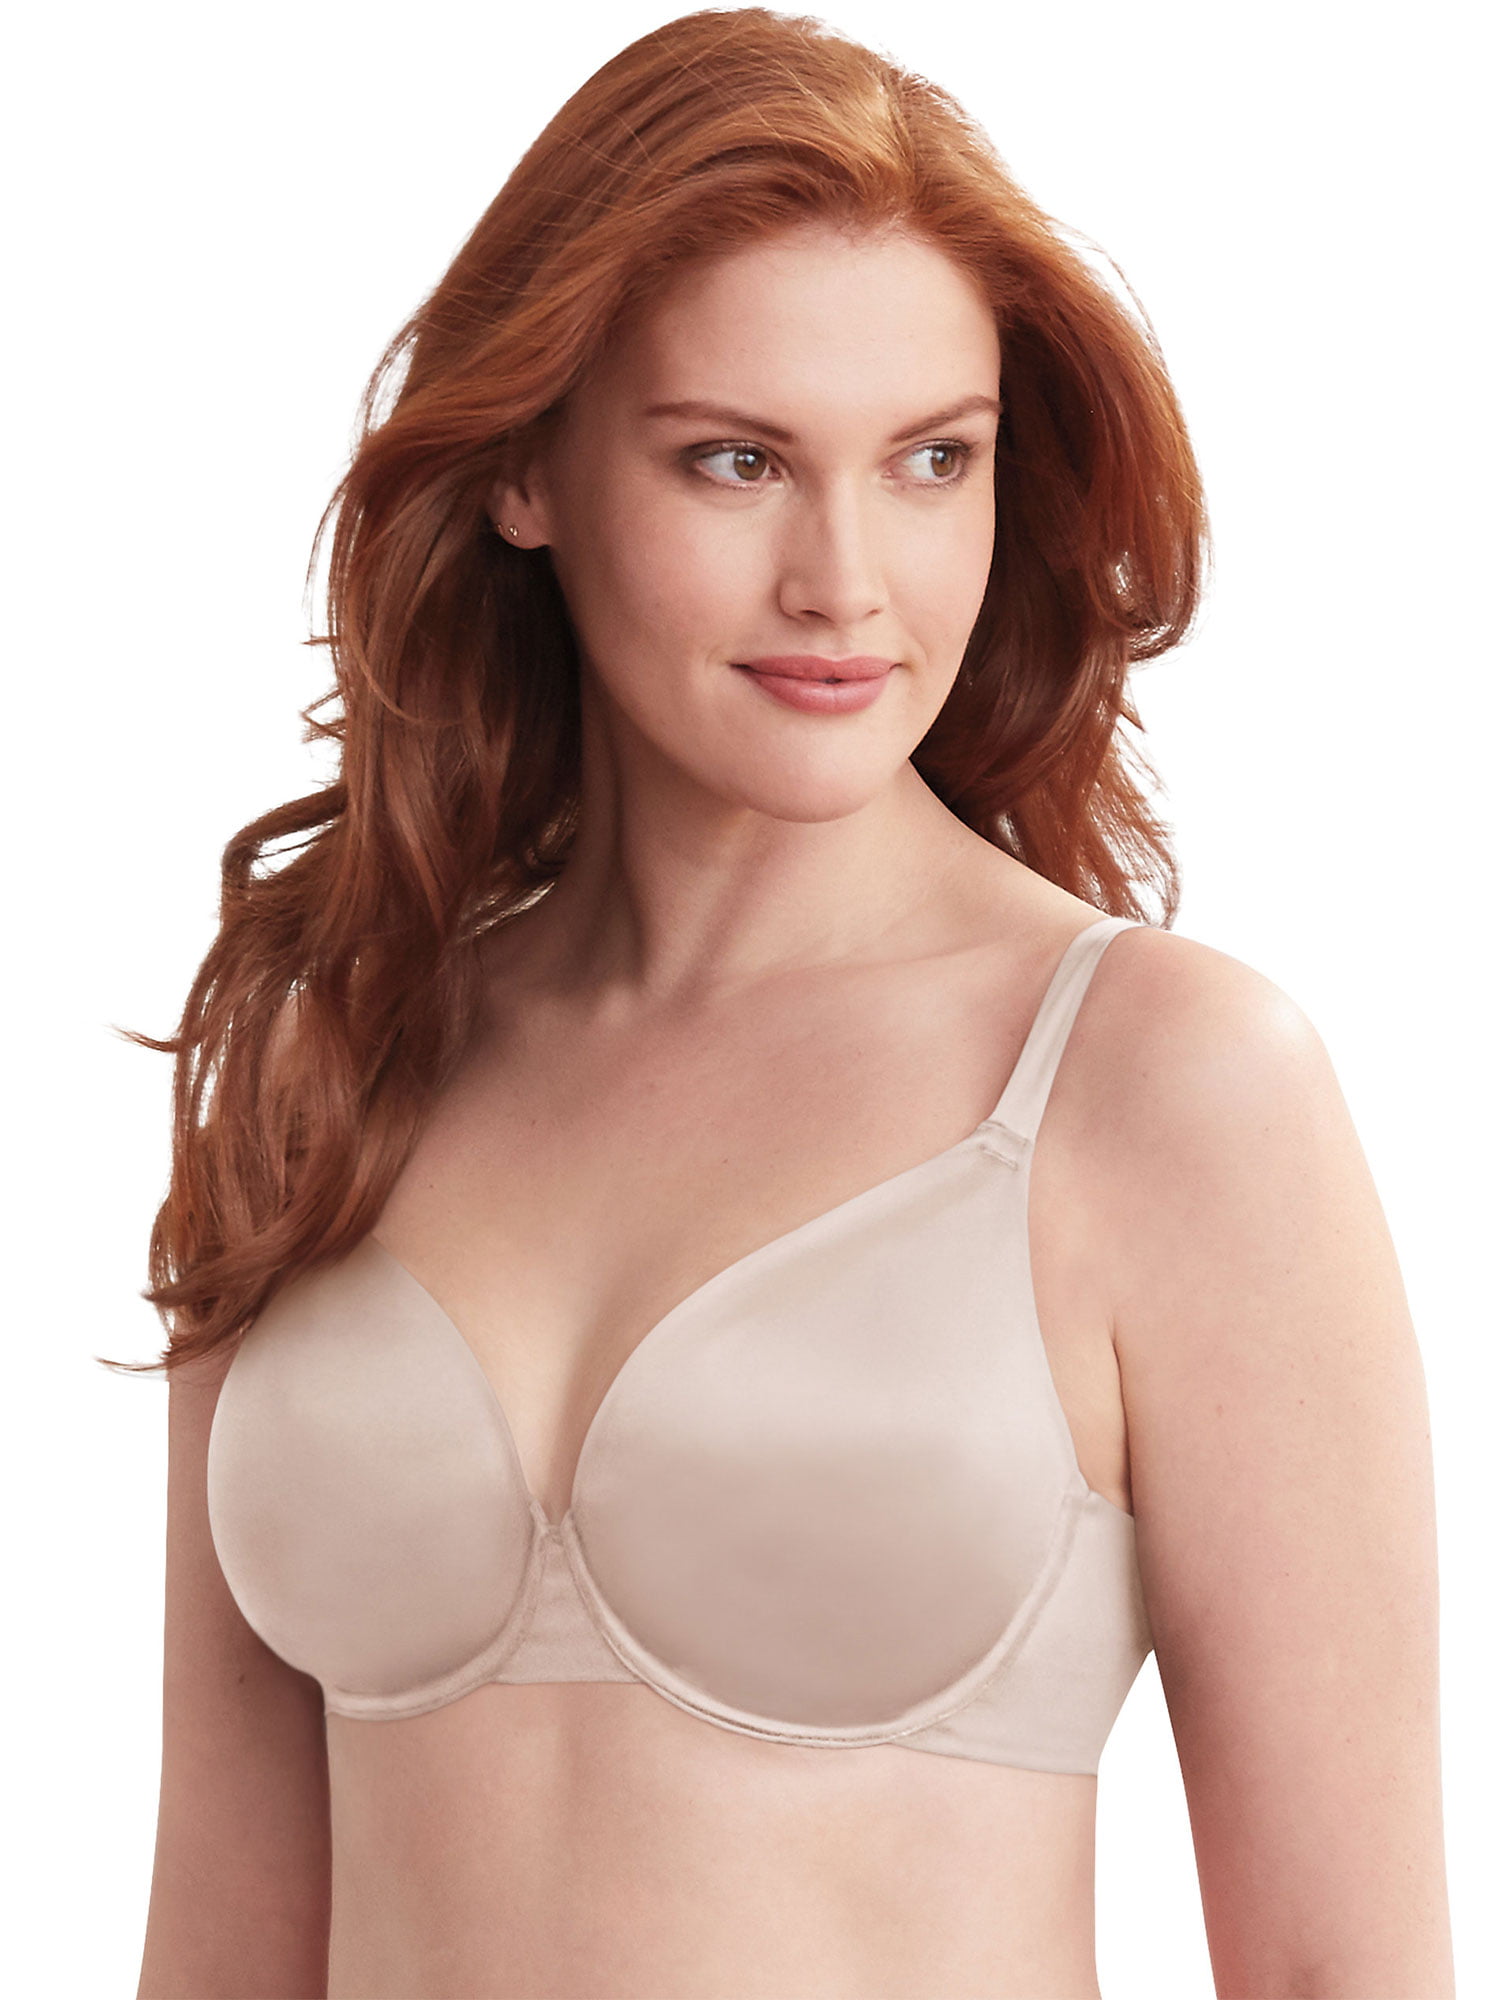 Bali Beauty Lift® Invisible Support Underwire Bra Sandshell 36DDD Women's 